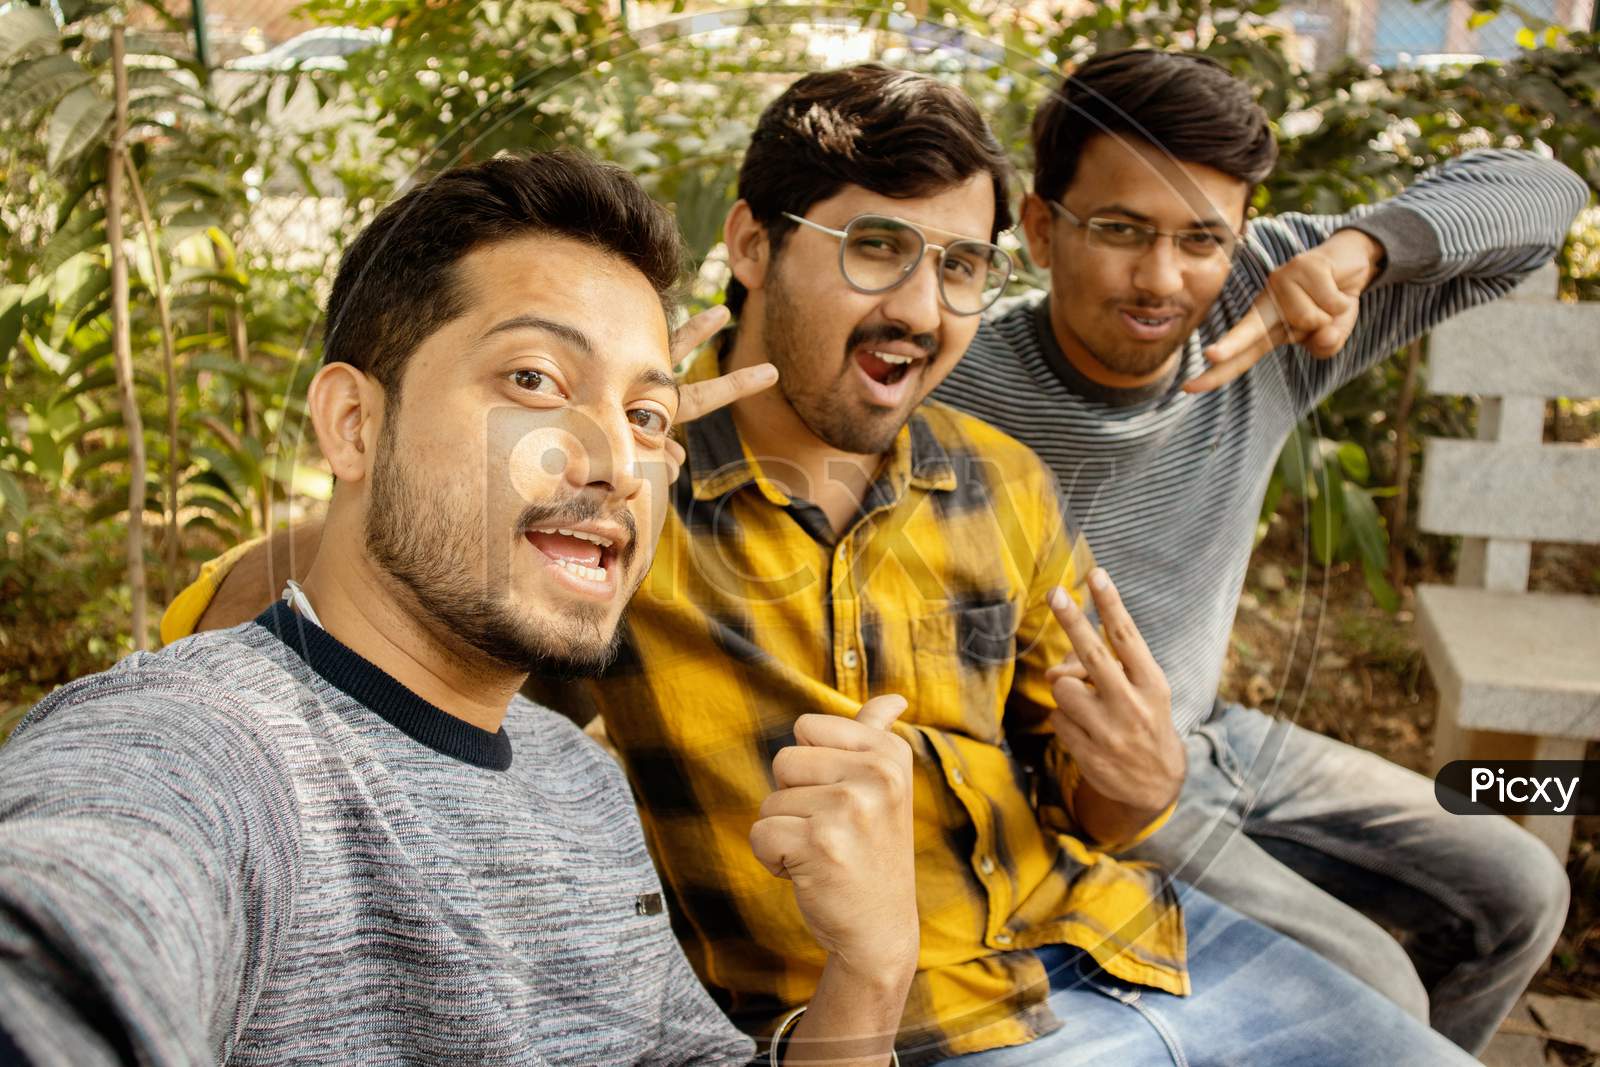 Group Of Friends Grimacing In Front Of The Camera - Young Happy People Having Fun At Park Making Funny Faces While Taking Selfie - Concept Of Millennials Addicted To Selfie, Technology And Mobile.